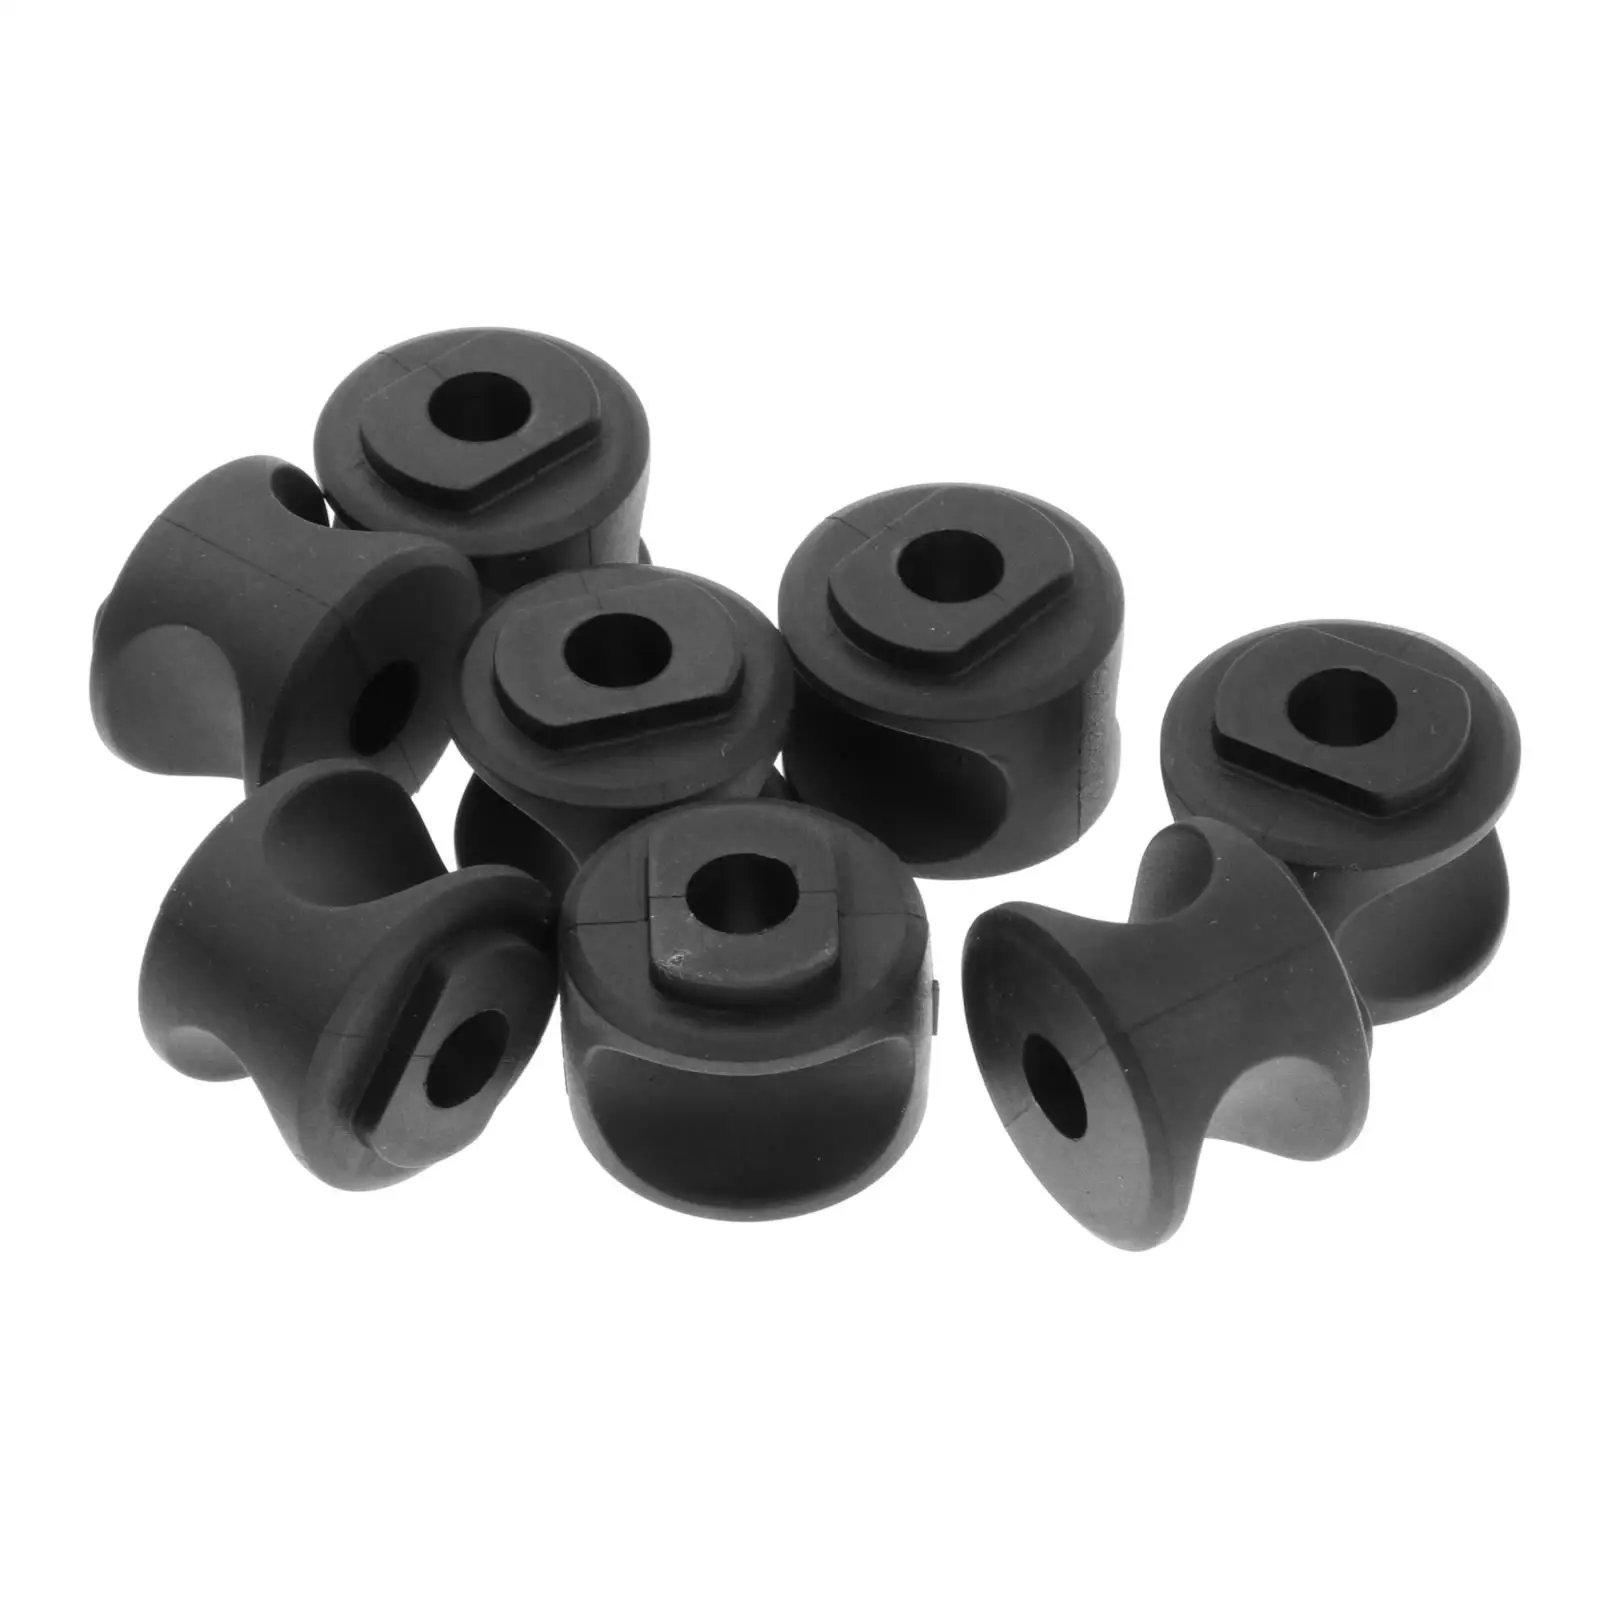 8 Pieces Black Rear Stabilizer Support Bushing for 97 05 Sportsman 500